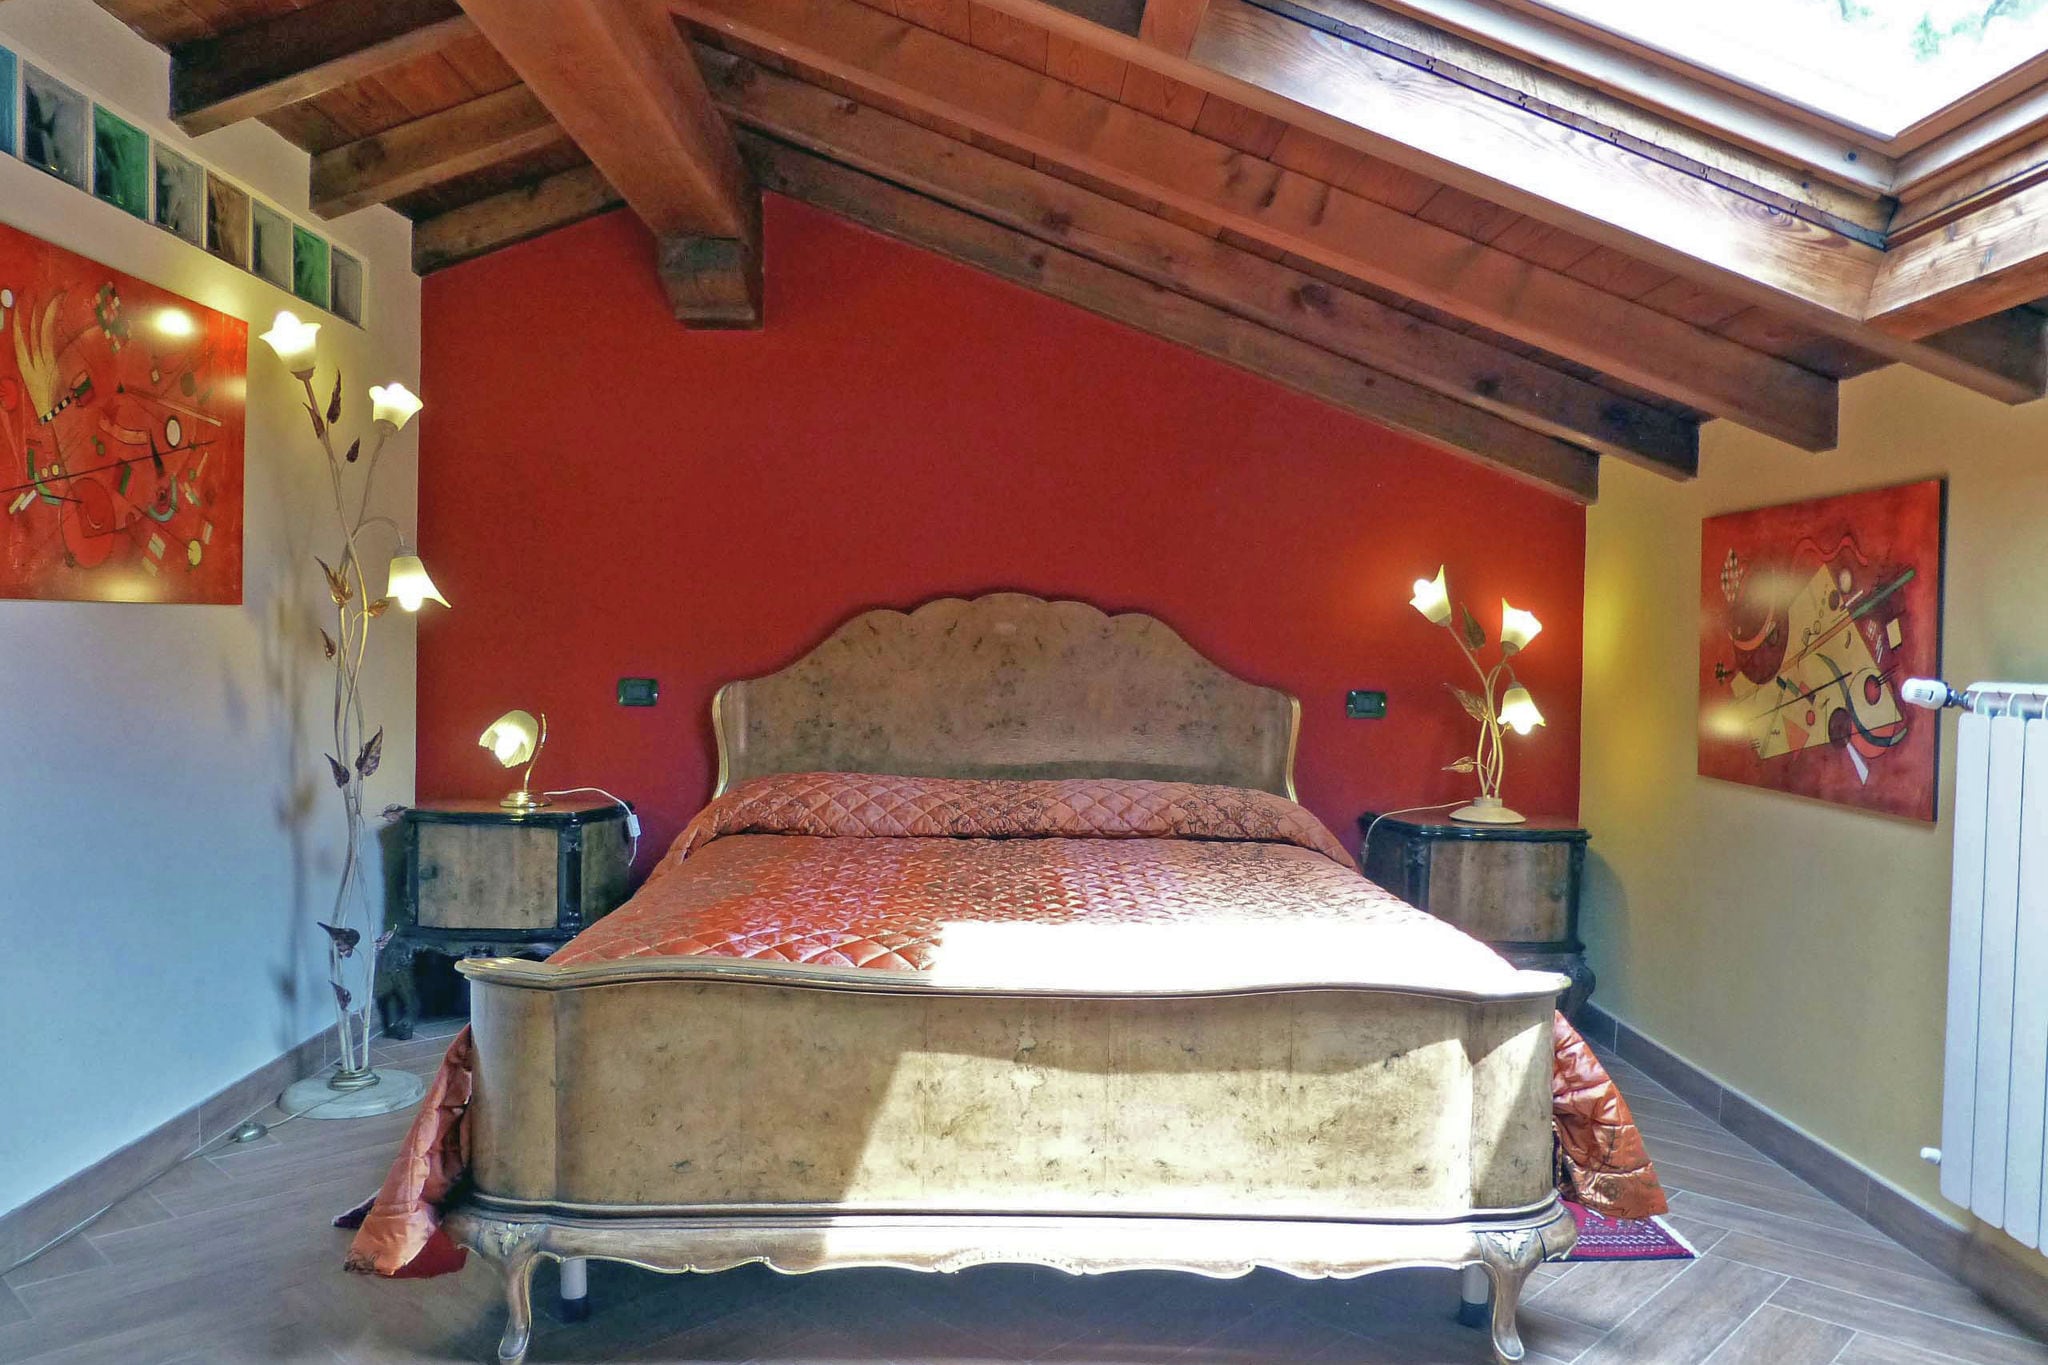 Exclusive villa in the countryside of Pistoia with private pool and bubble bath